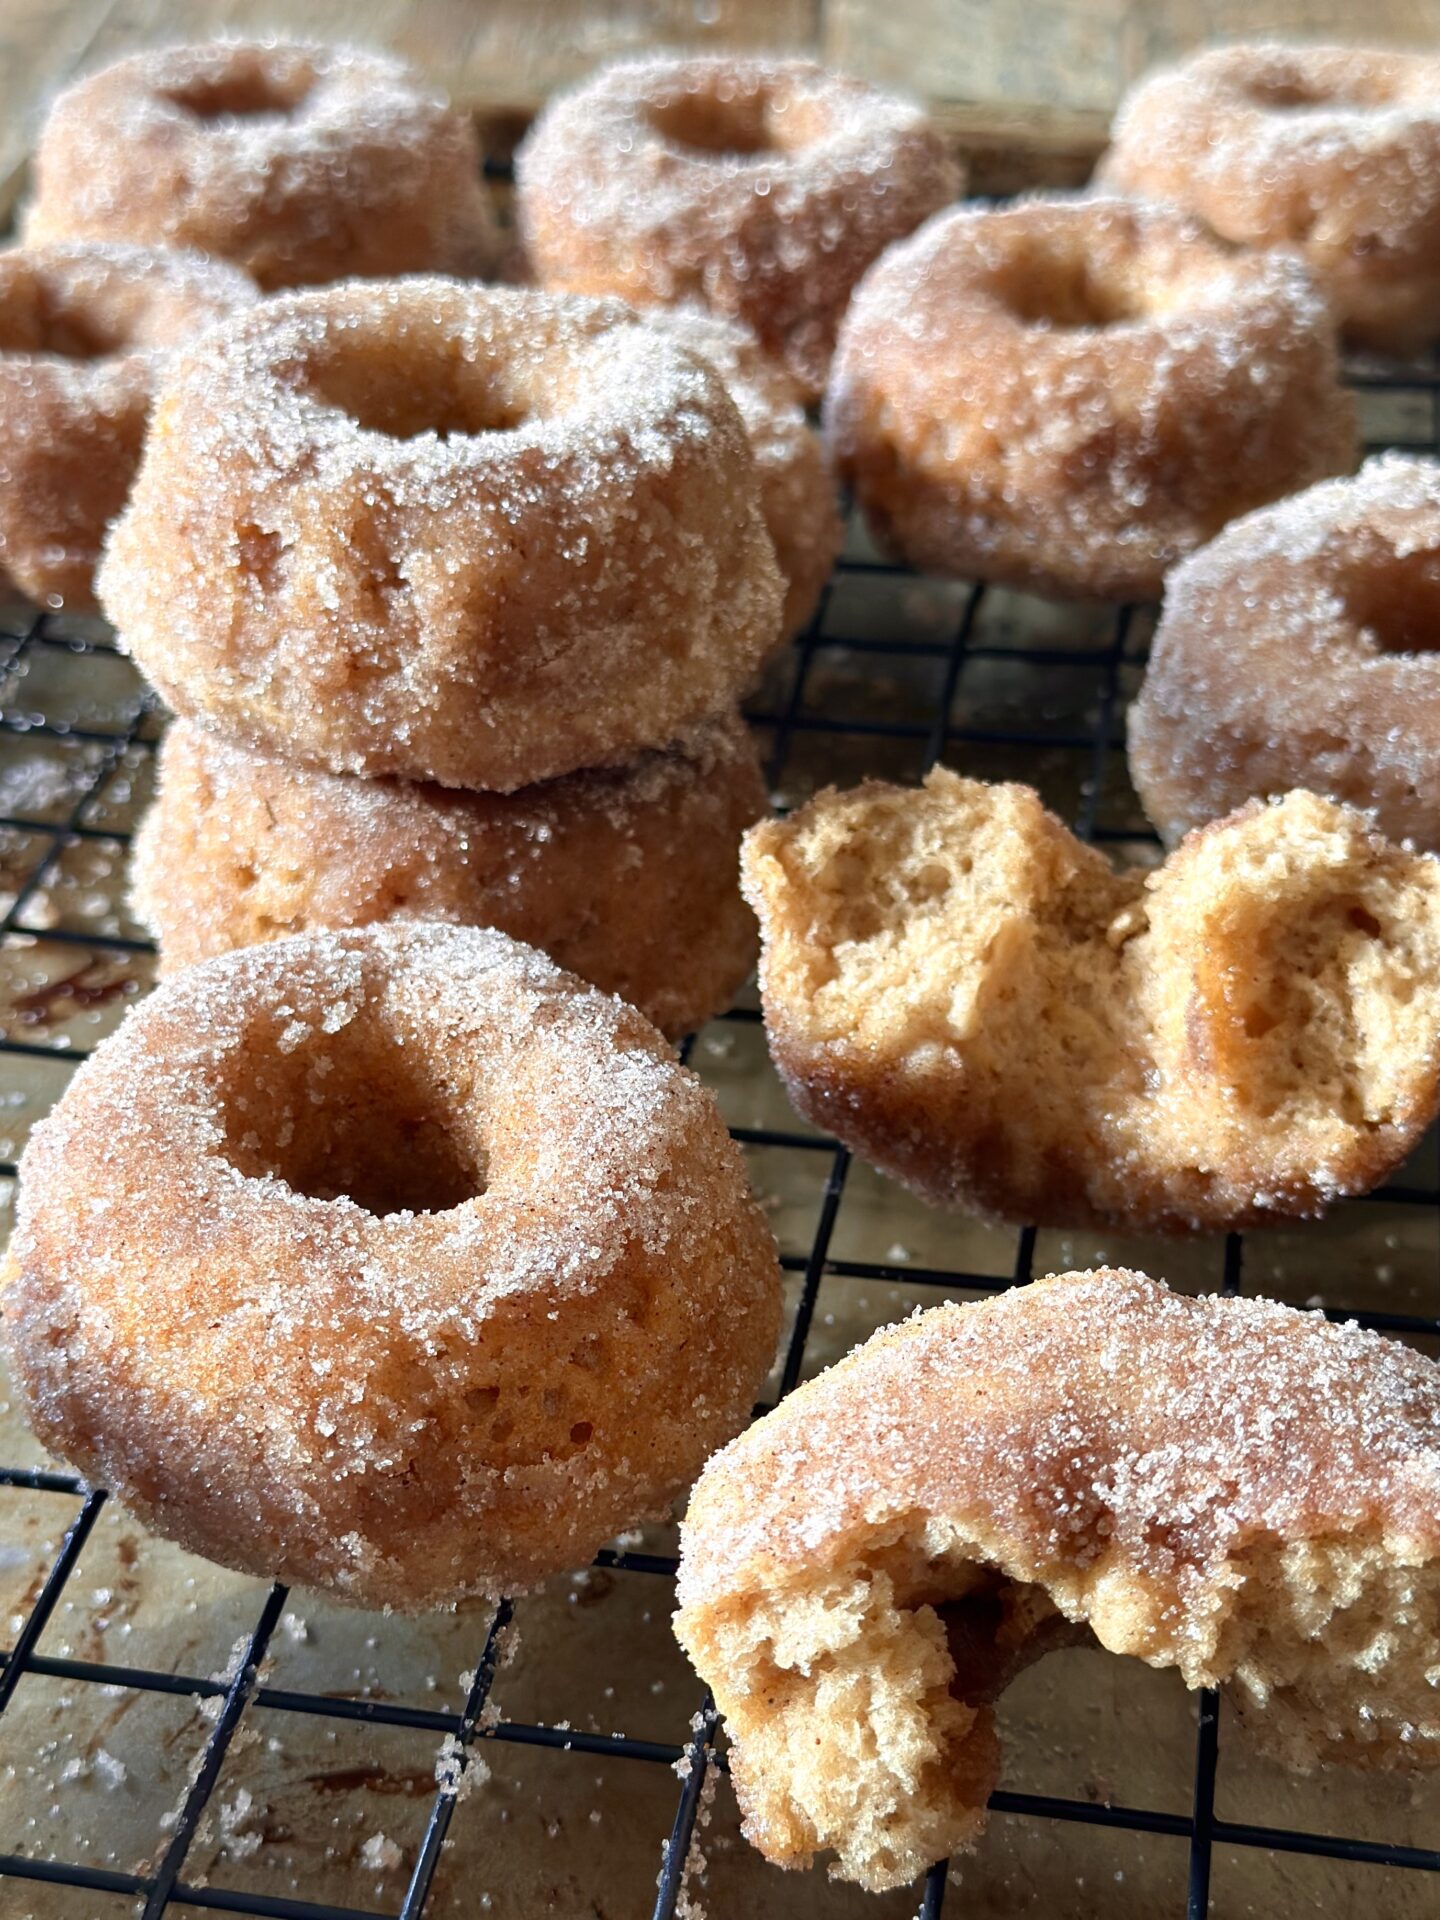 Homemade old fashioned baked cinnamon sugar donuts are stacked on a cooling rack.